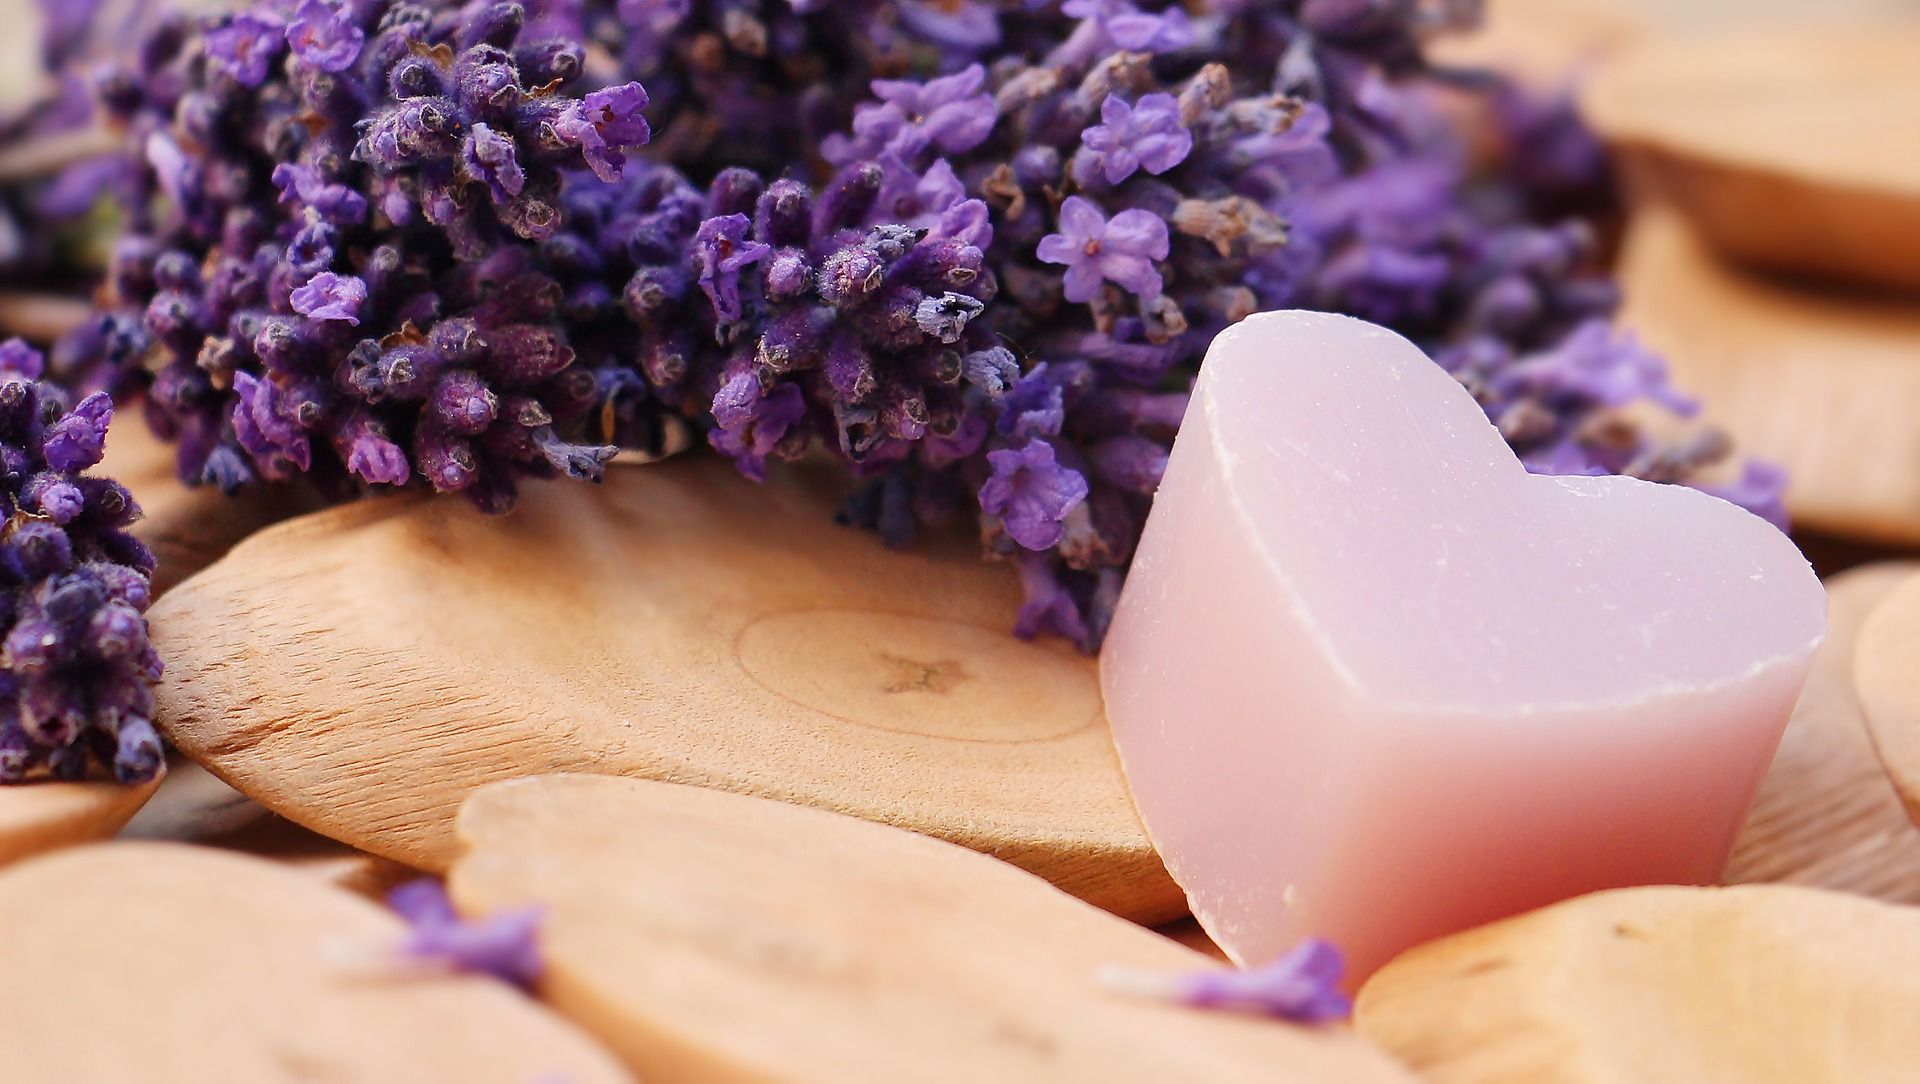 Kid Friendly Uses for Lavender Essential Oil